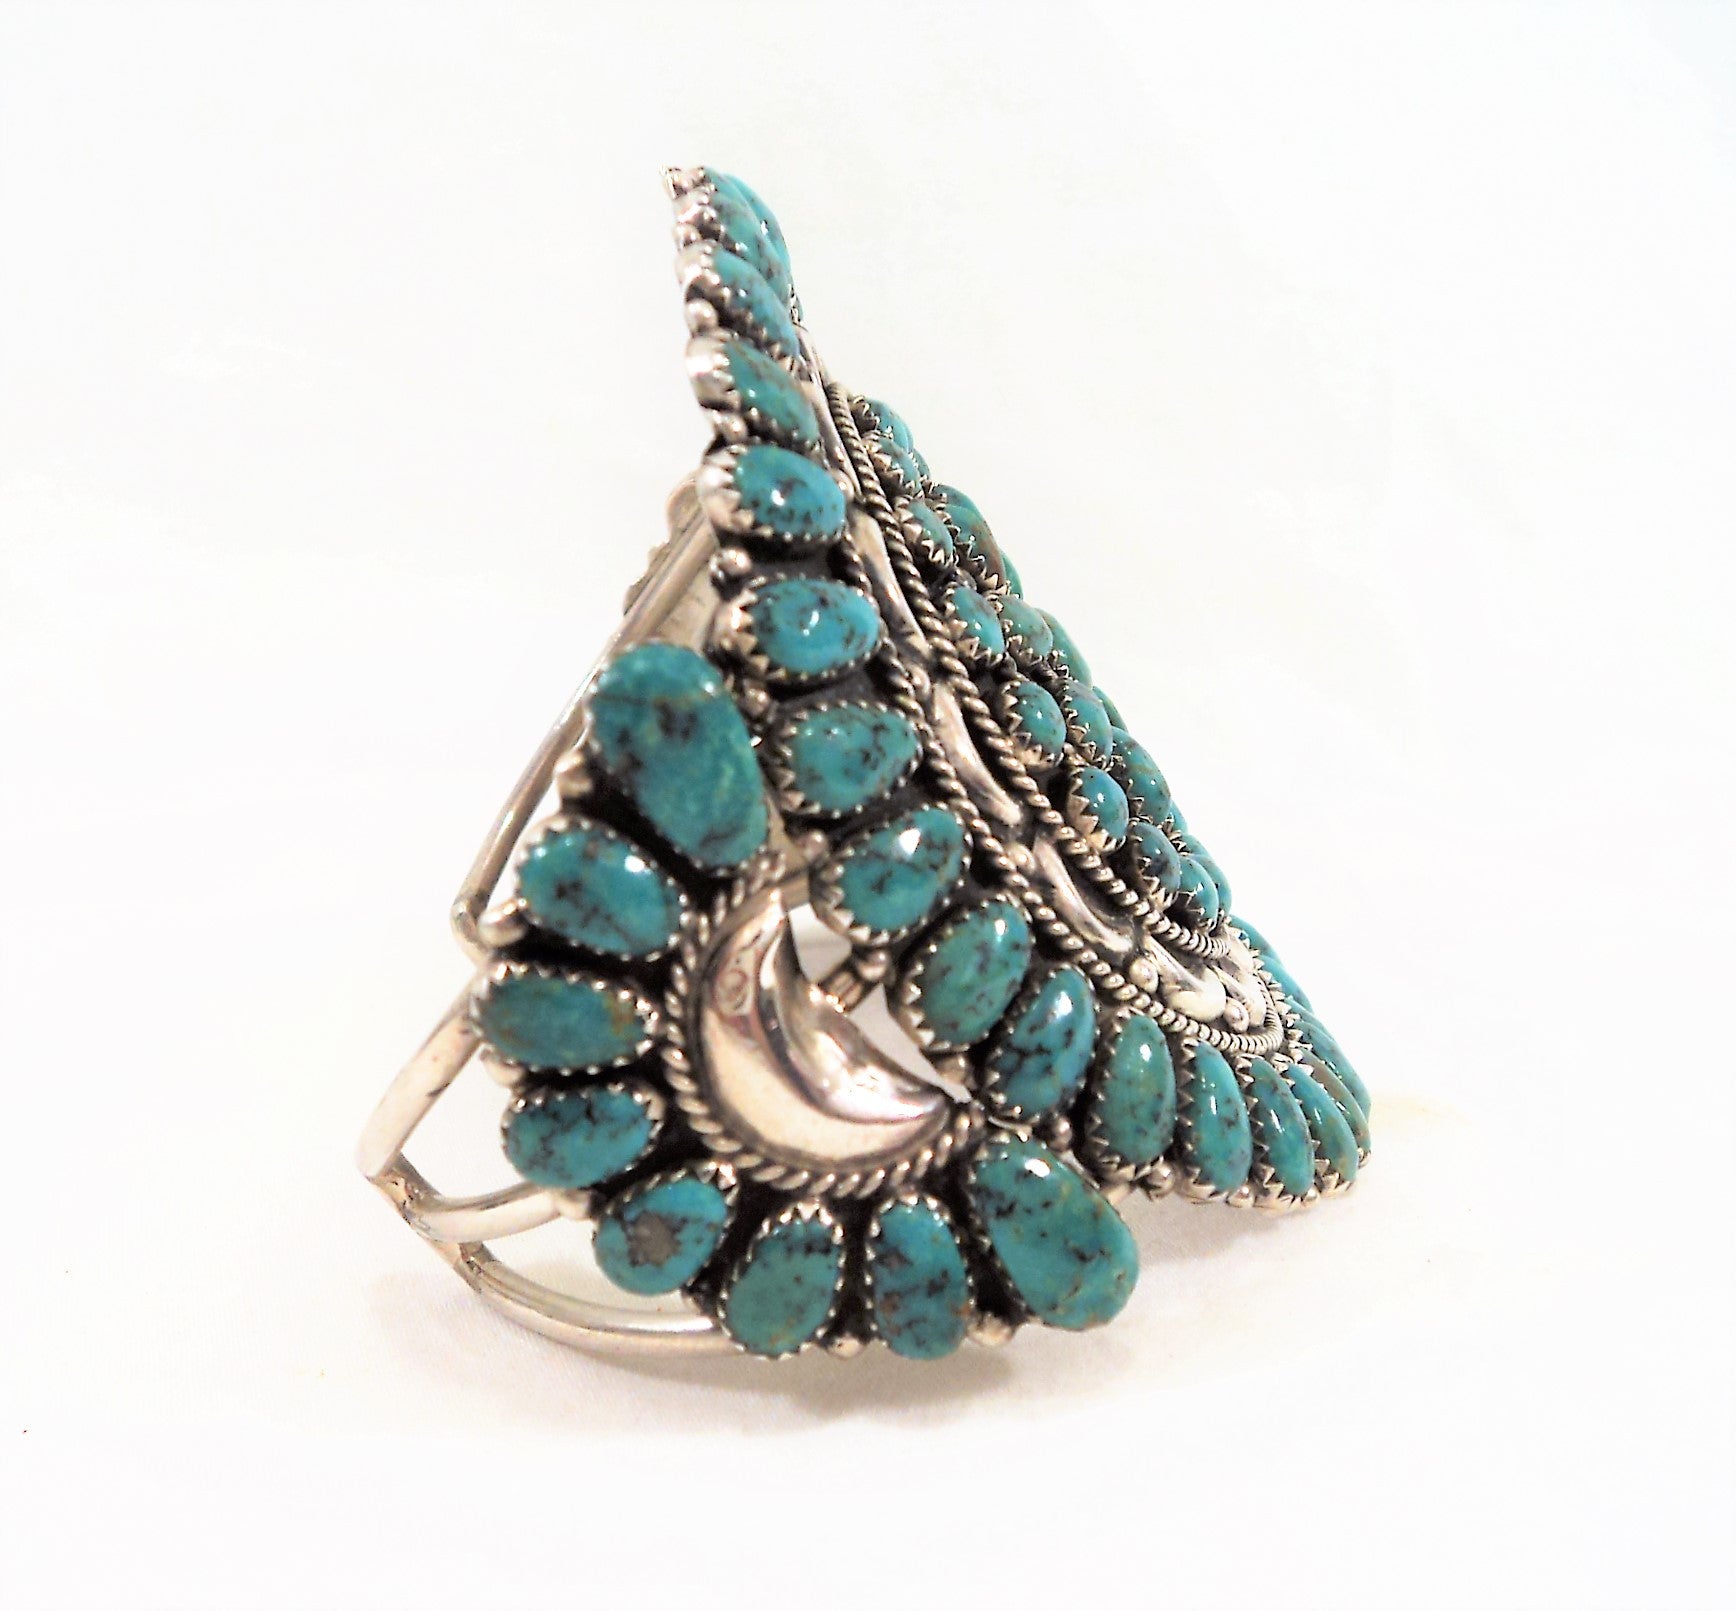 Native American Sterling Silver and Turquoise Cuff Bracelet by Jerry and Wilma Begay